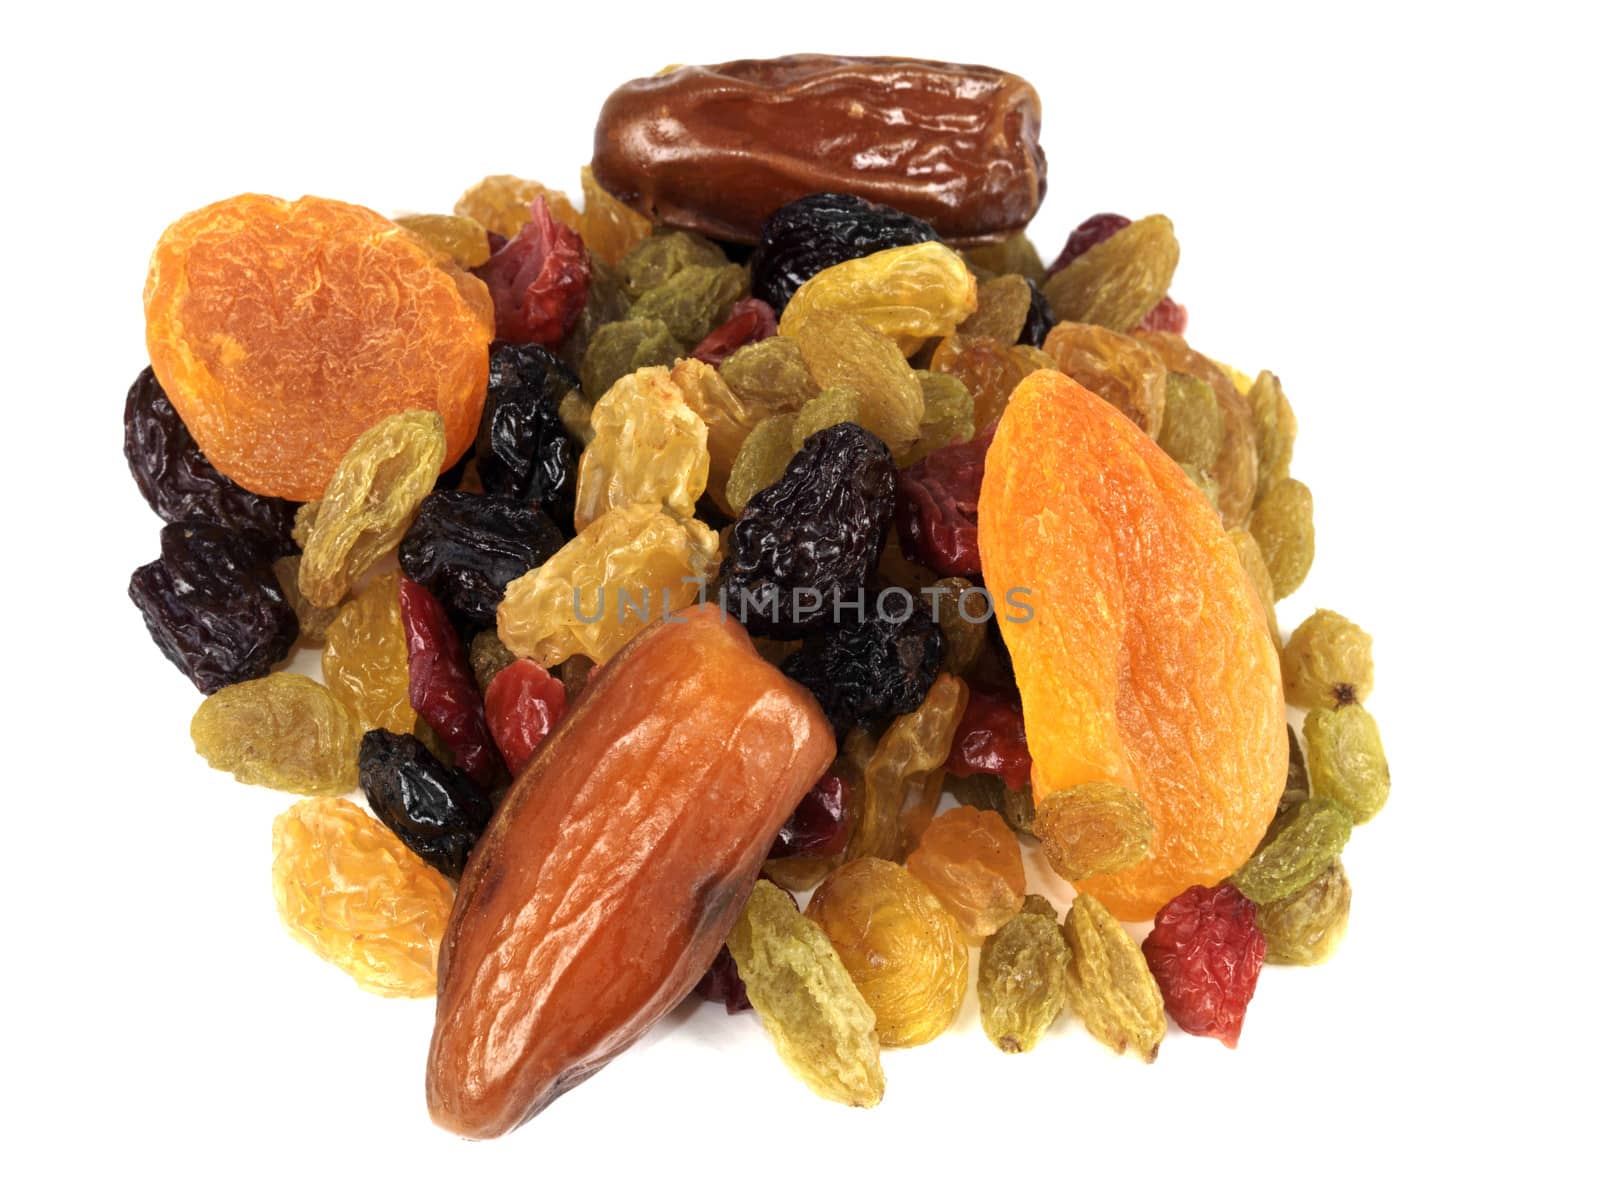 Dried Mixed Fruit by Whiteboxmedia